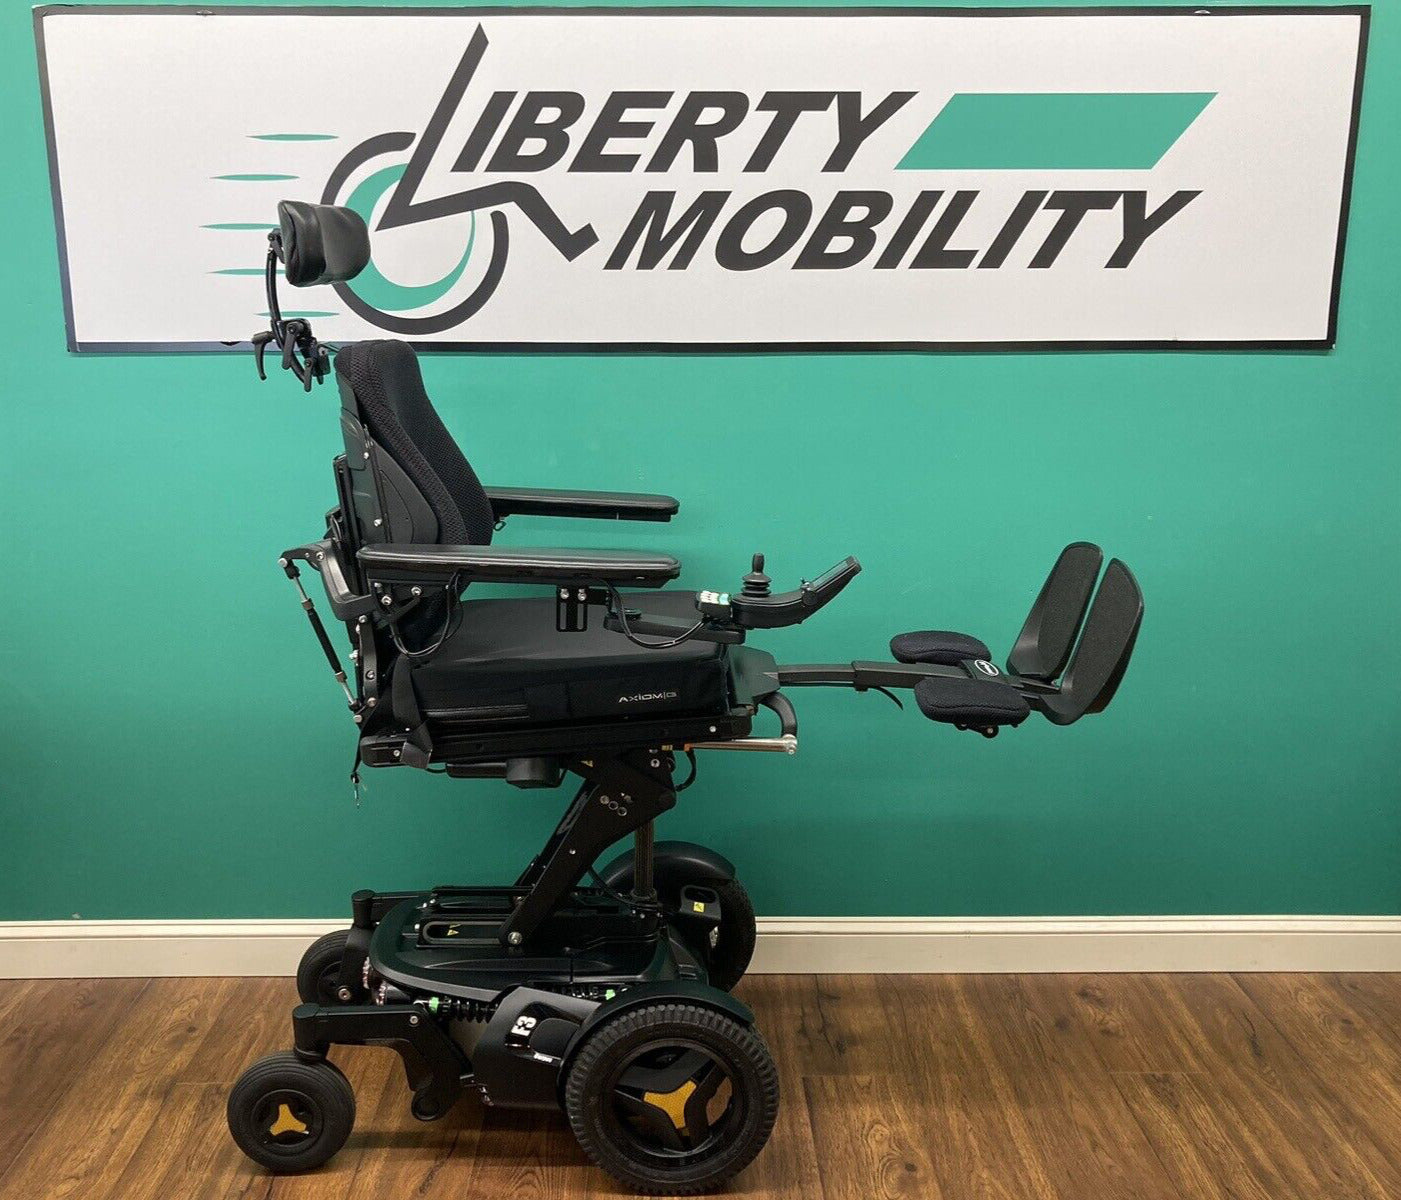 2017 Permobil F3 Wheelchair w/Elevate,Tilt, Recline,Legs ~ ONLY 37 MILES* LM7546